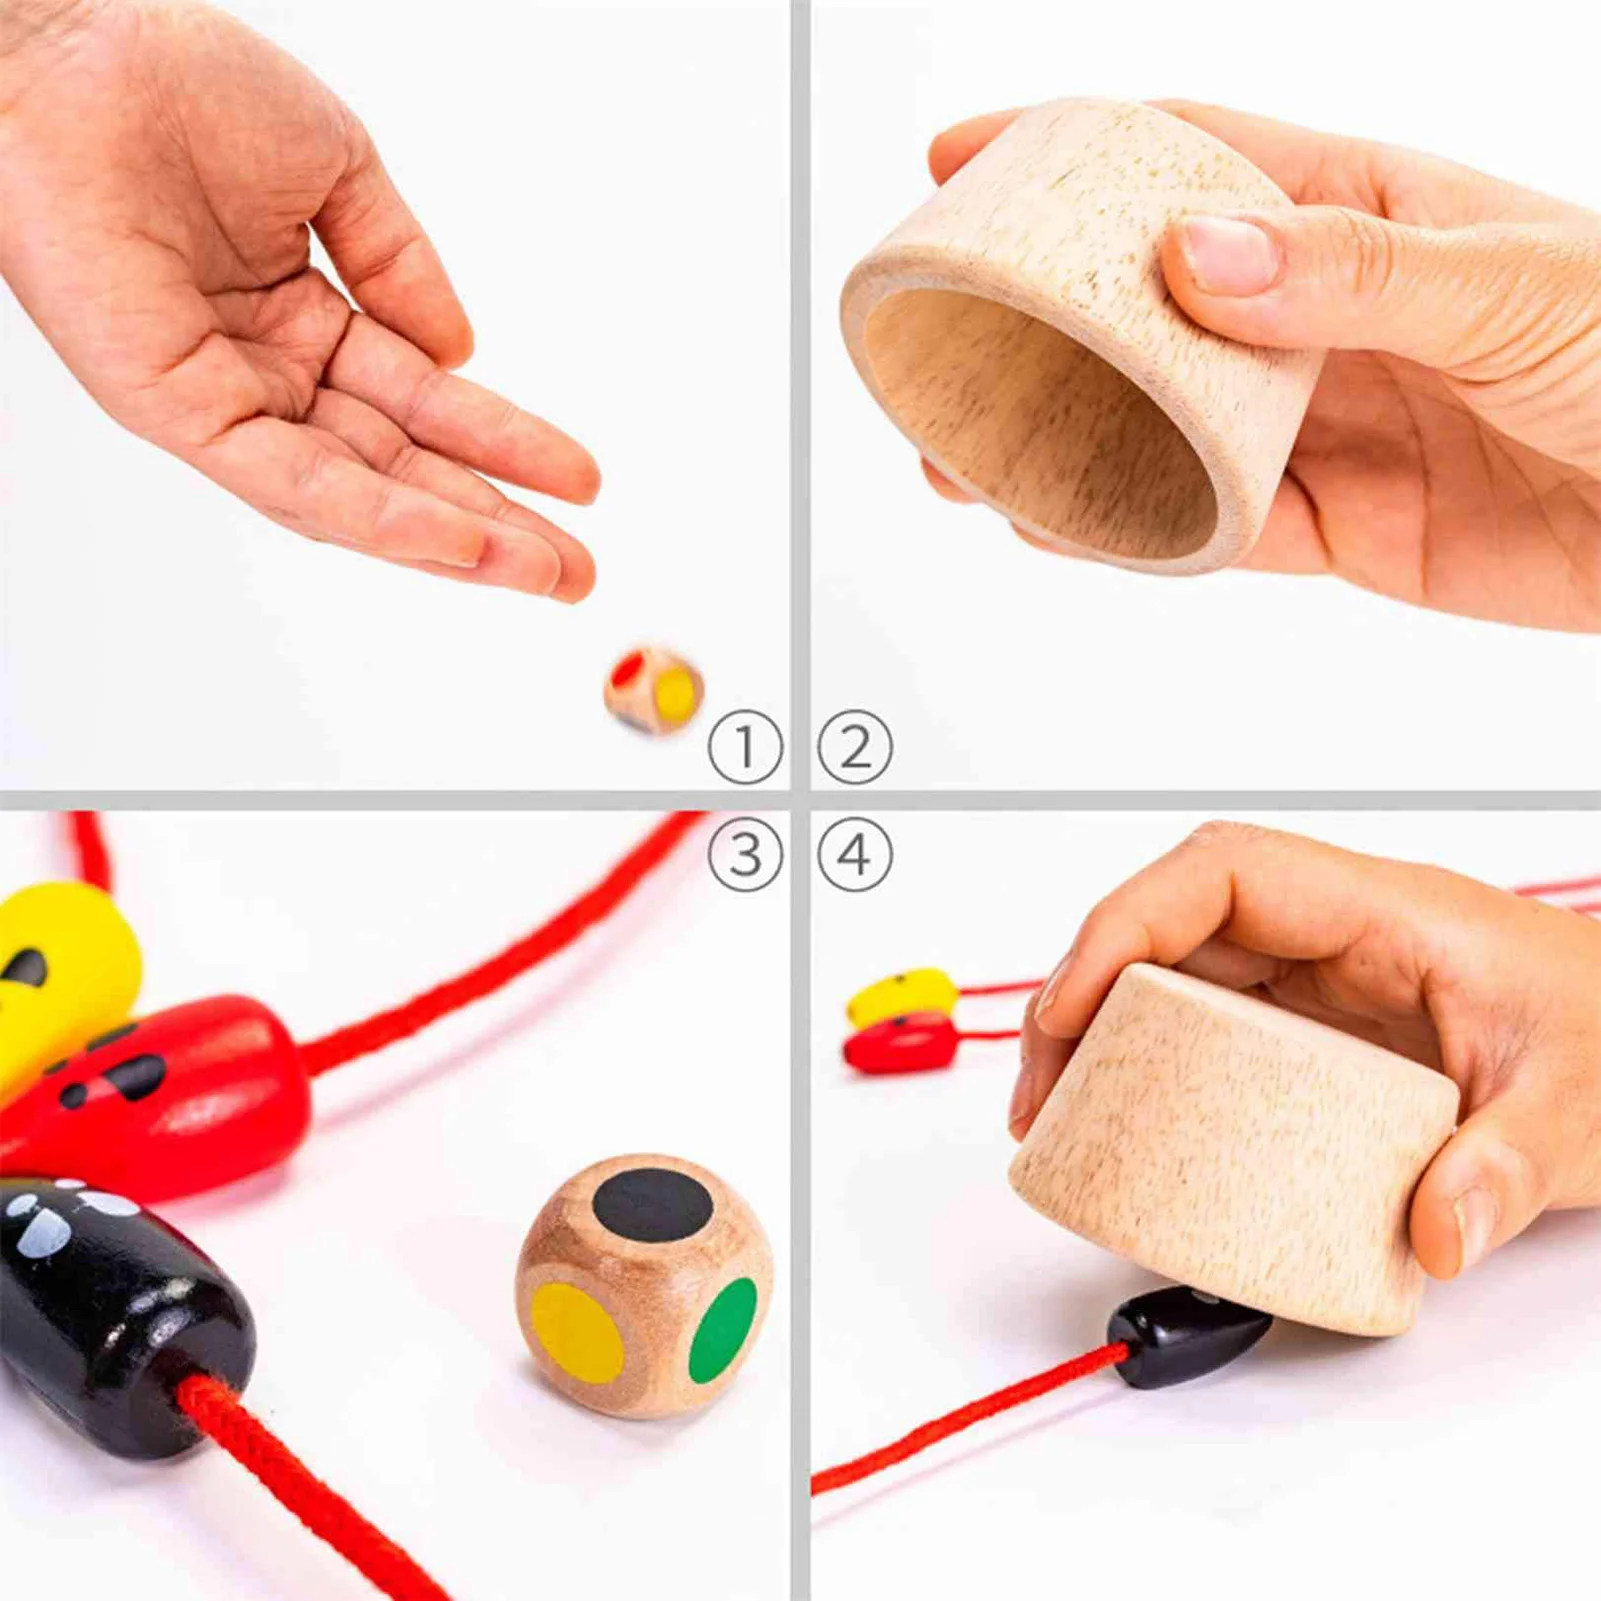 https://ae01.alicdn.com/kf/H27f86127a3444fbbaa57af89b5da9d063/Wooden-Mouse-Catching-Board-Game-Innovative-Funny-Children-Interactive-Cat-Catch-Mouse-Desktop-Game-Educational-Toy.jpg